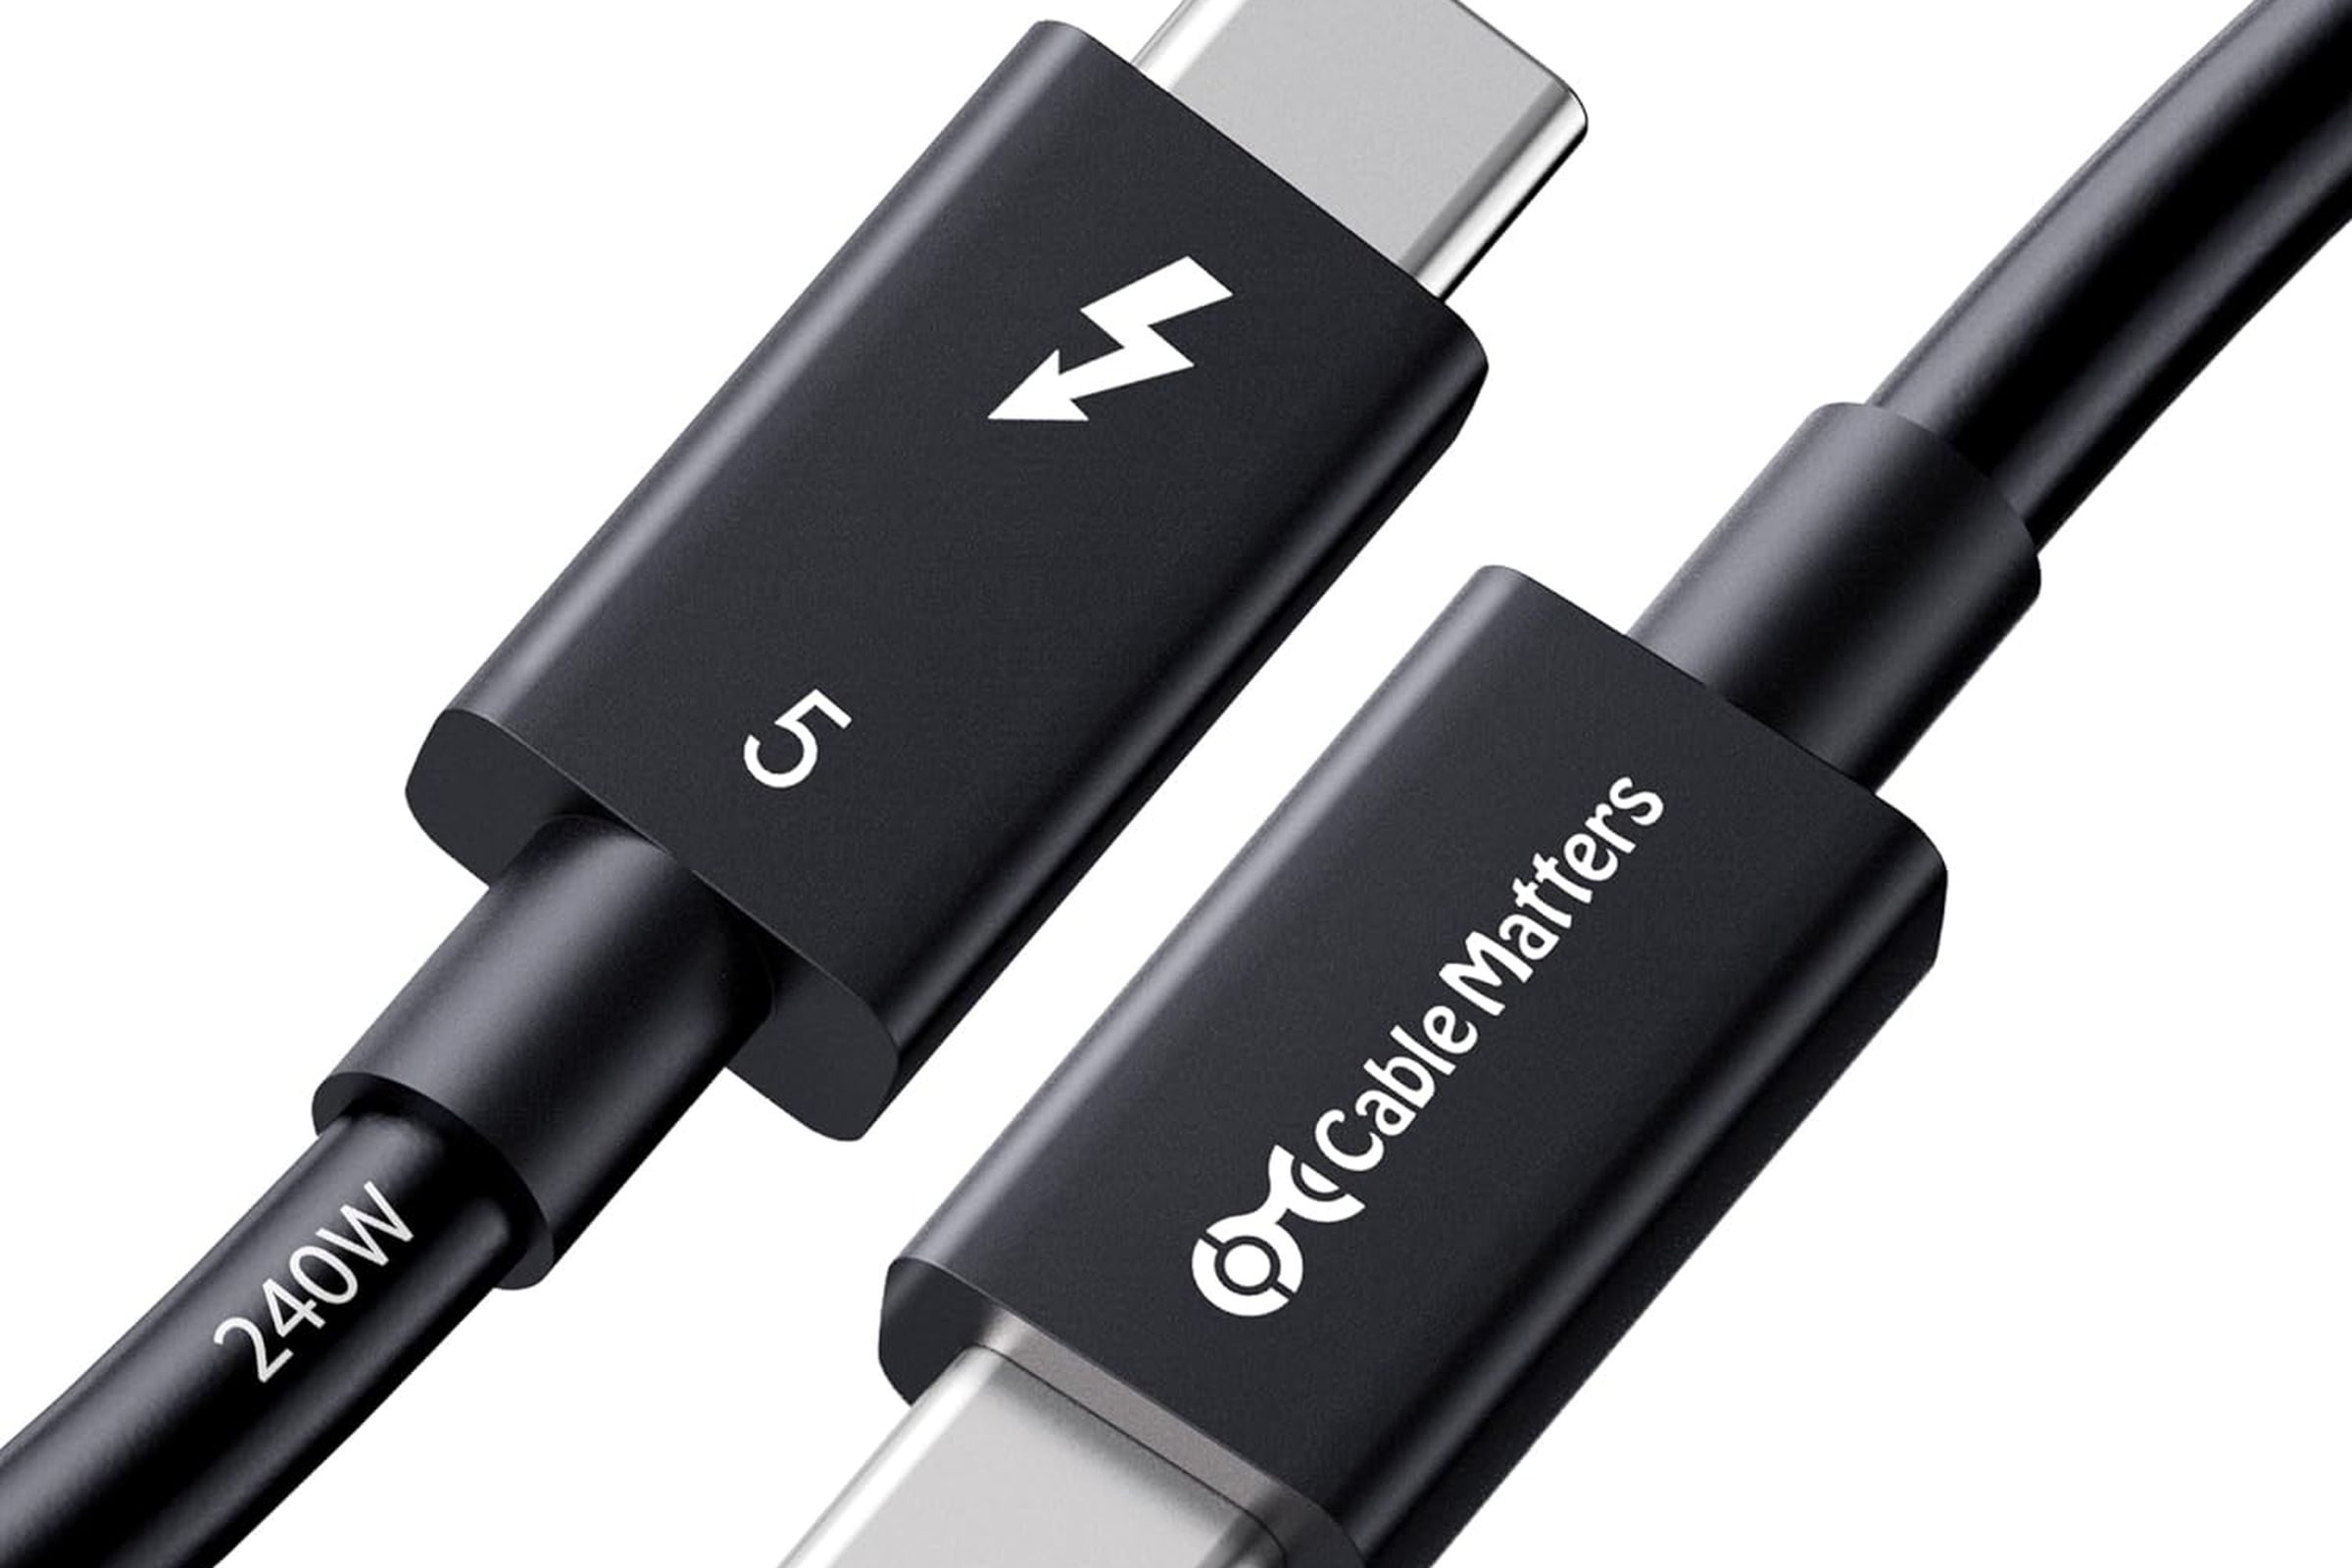 Thunderbolt 5 cables, like their TB4 and TB3 predecessors, have USB-C tips.